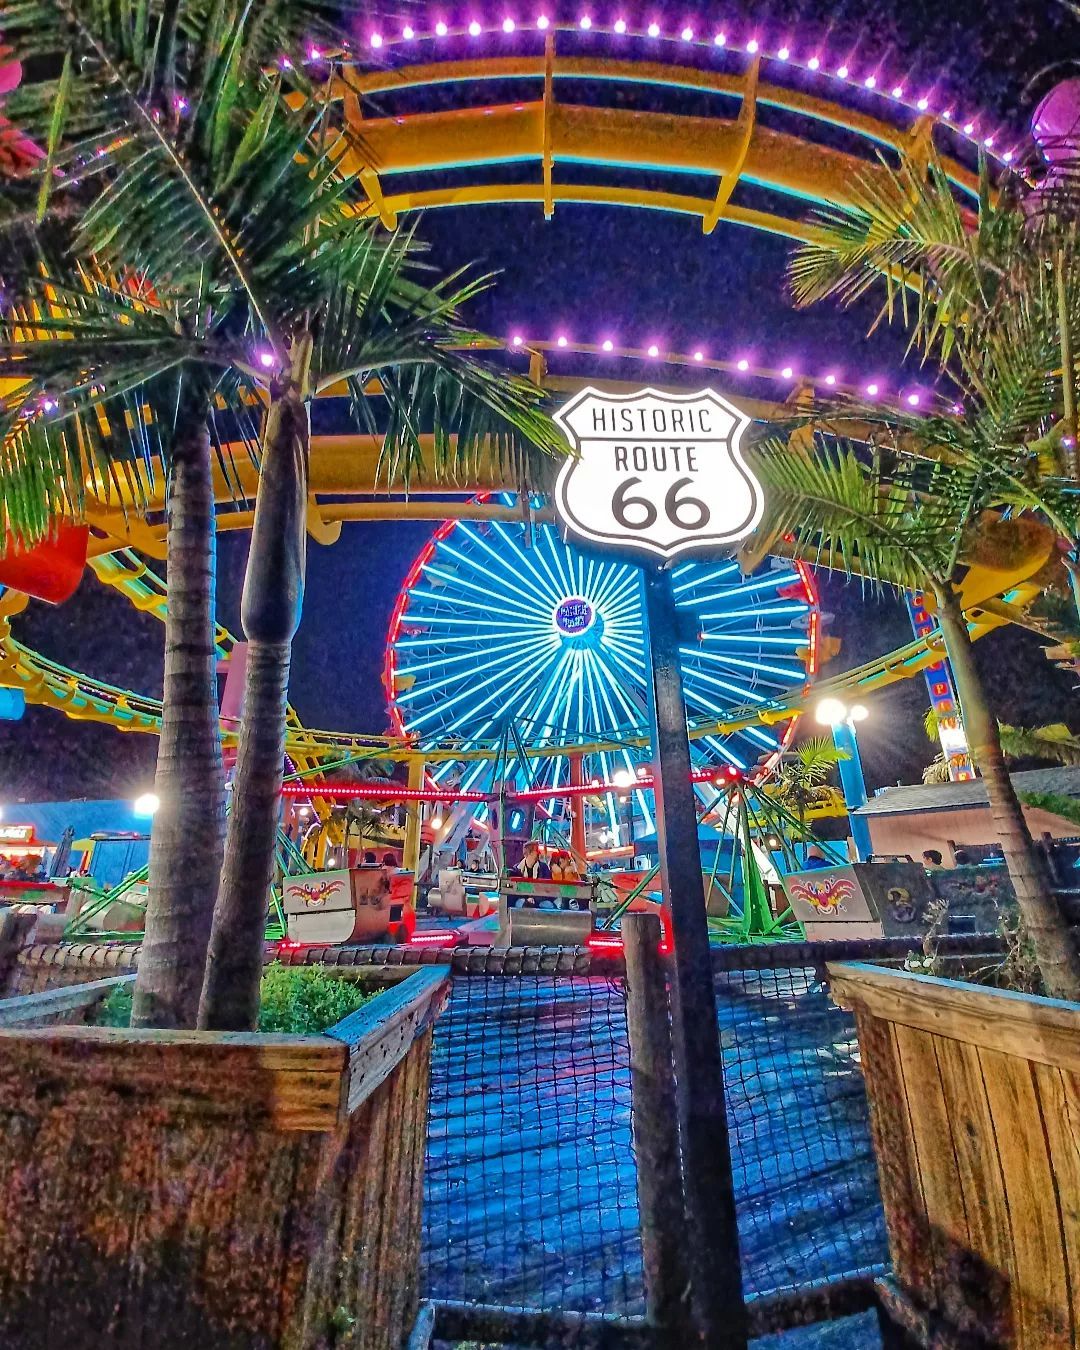 #PhotooftheWeek: love these mesmerizing colors! 📸 @socallindsay
.
#Route66 #PacificPark #PacPark #TravelPhotography